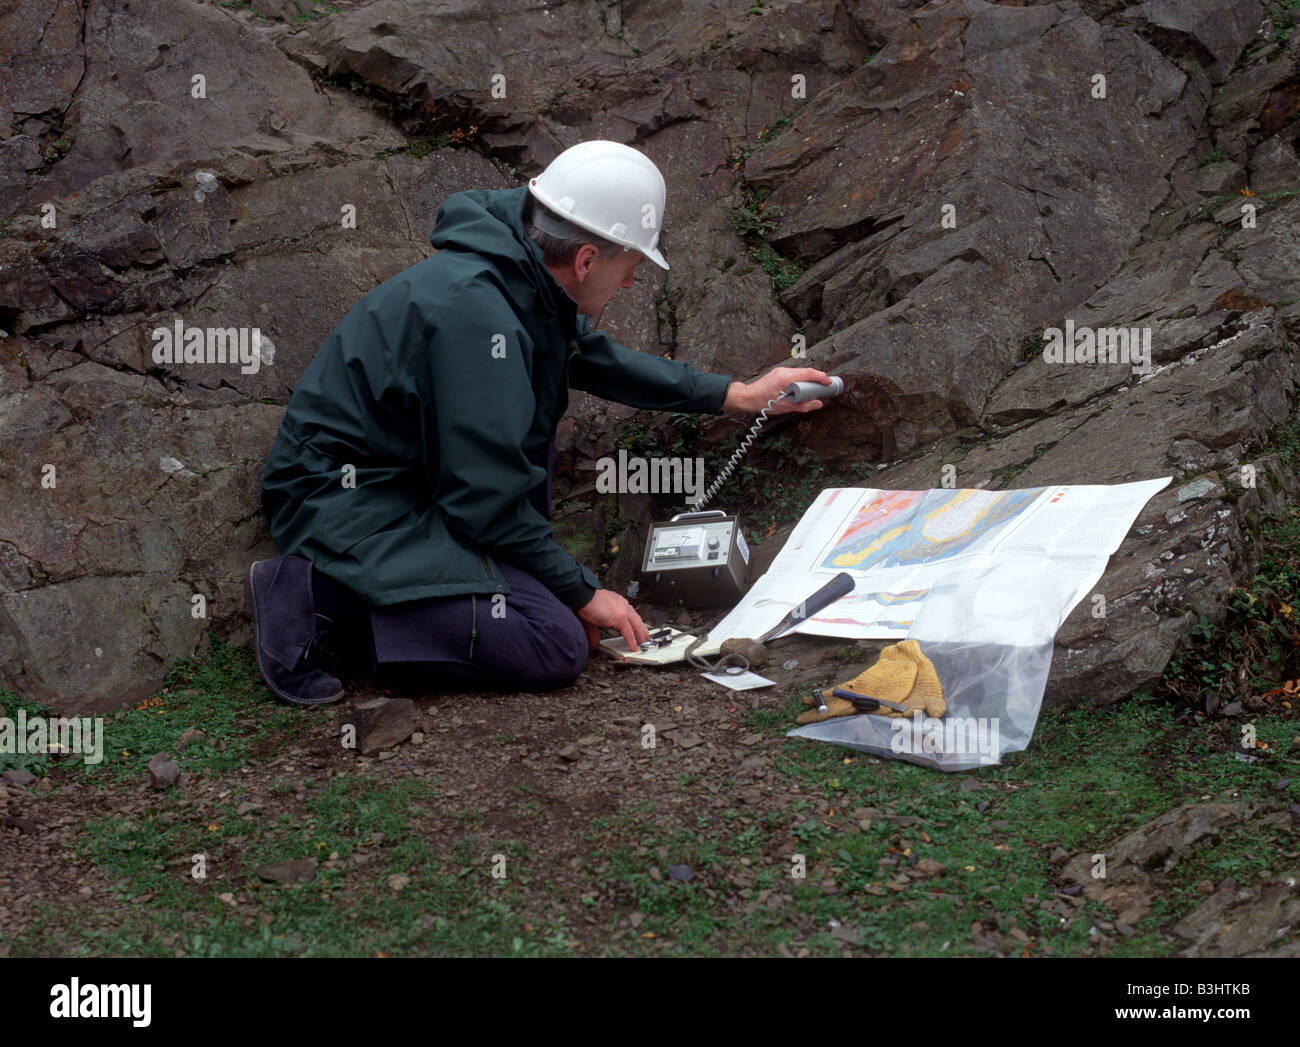 A geologist uses a geiger counter to check for radiation while examining rocks Stock Photo